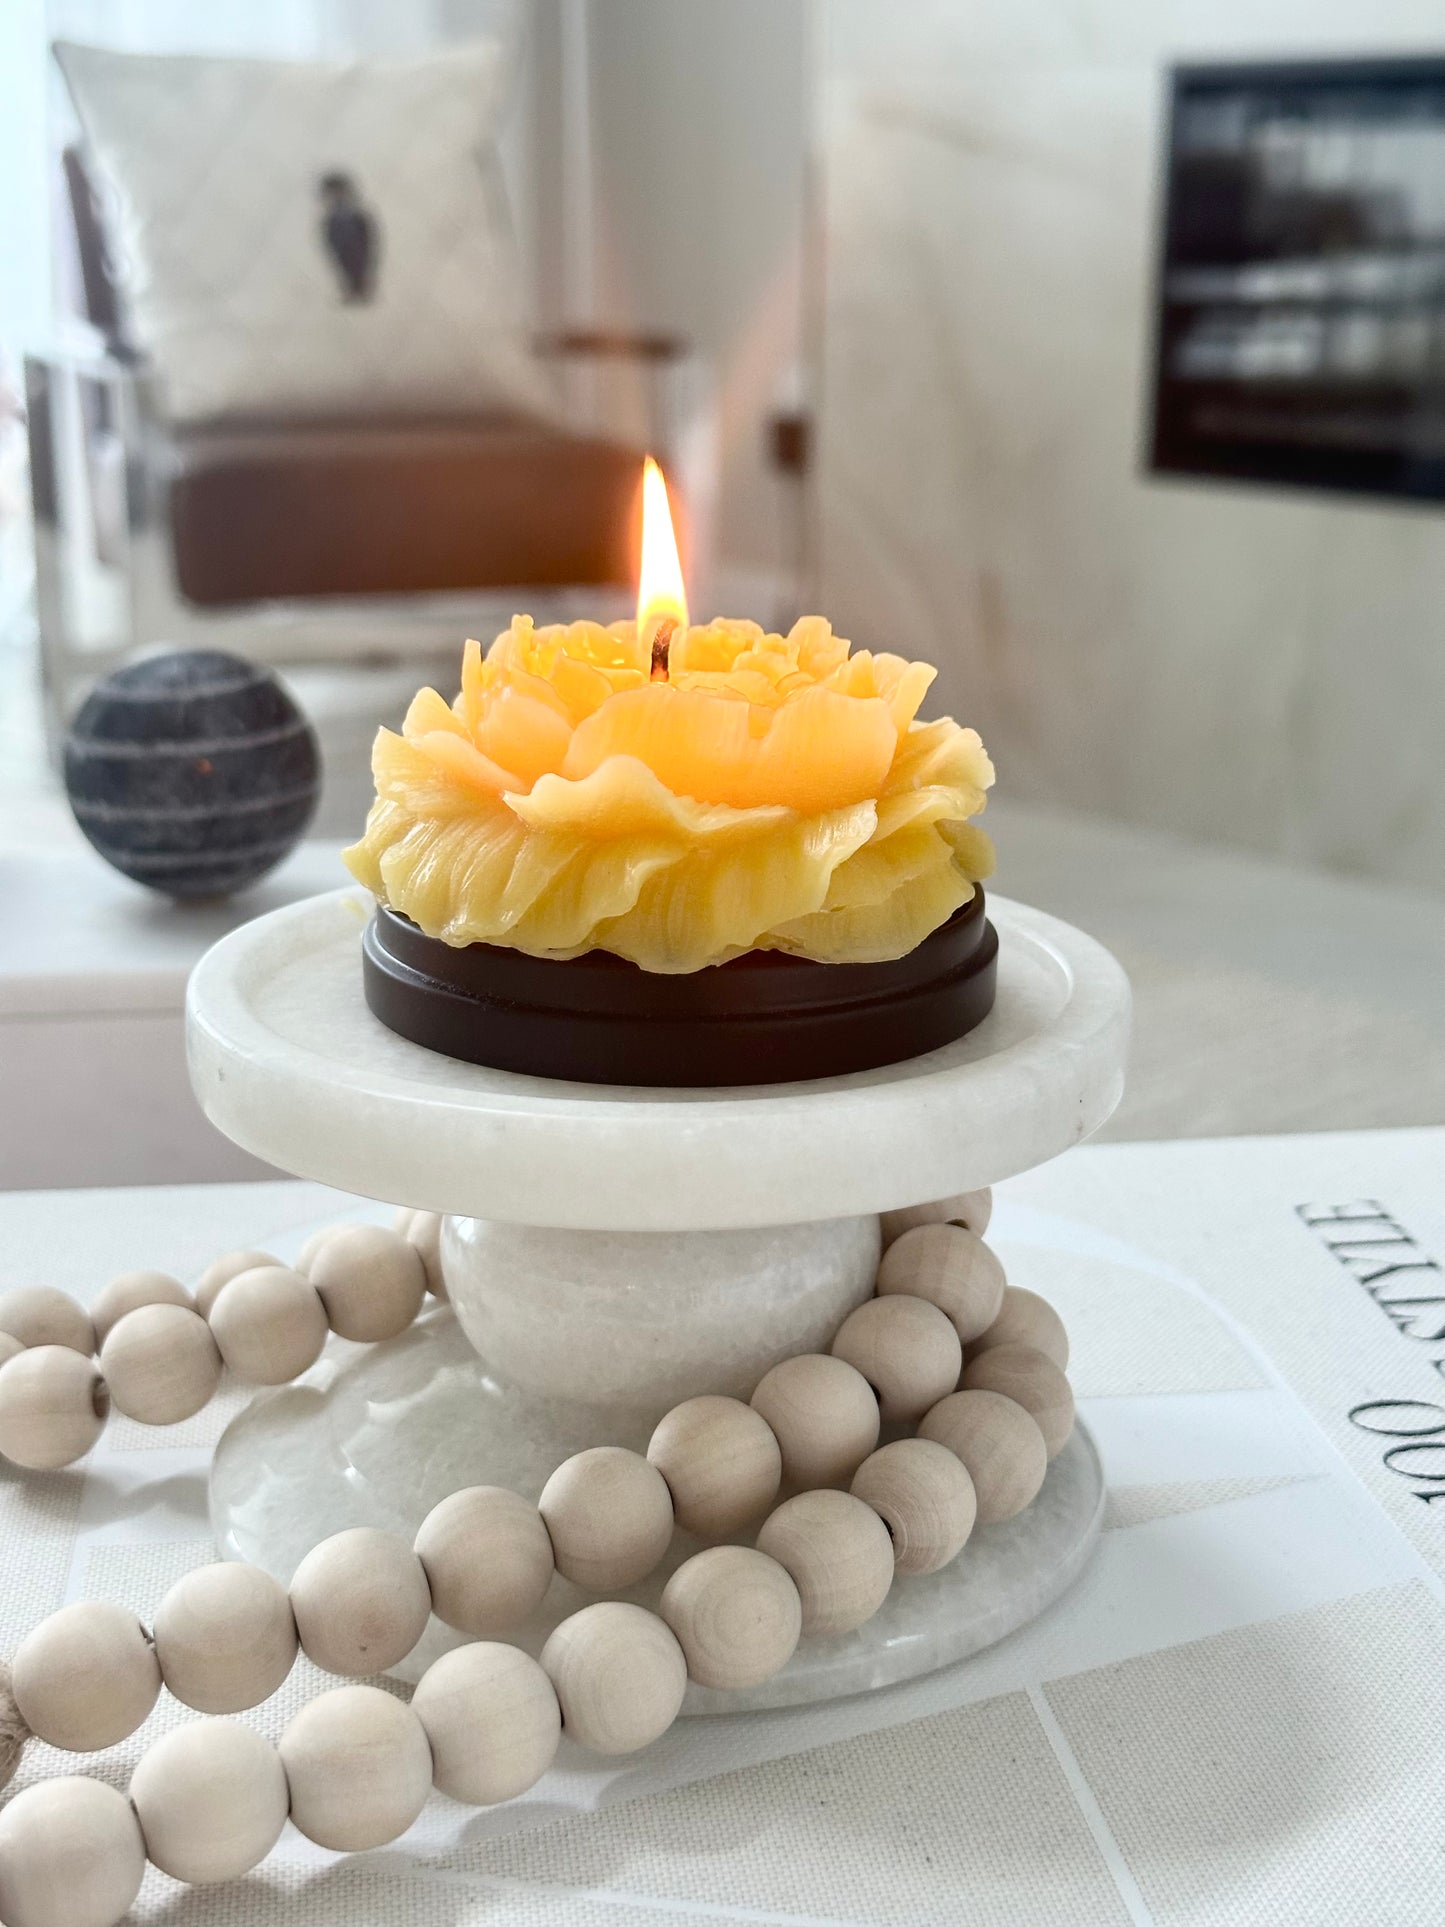 Rose Beeswax Mini Candle | Organic pure natural | Unscented | Scented Aromatherapy Mini Candle Gift | Rose Shaped Peony